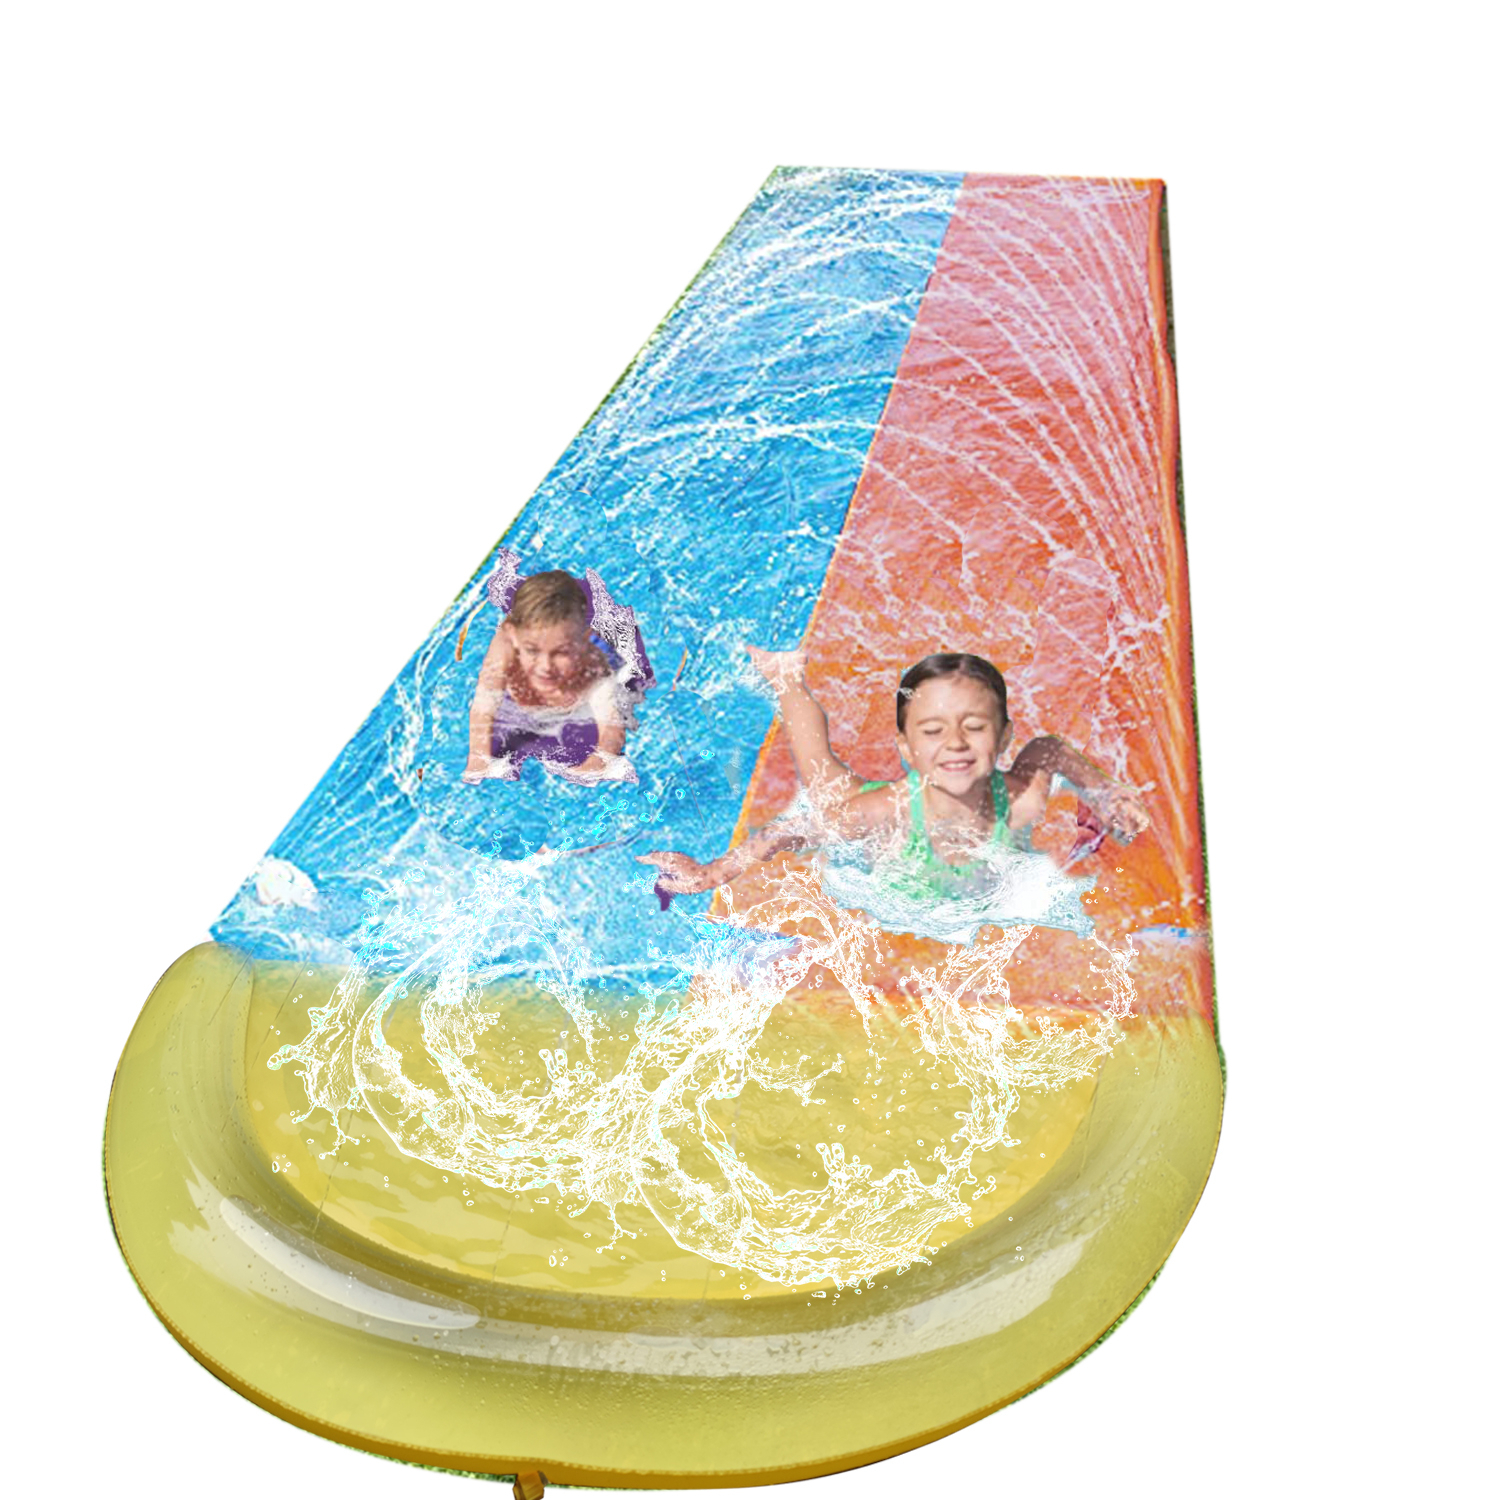 Dimple Inflatable Water Slide With 2 Bodyboards,Water Slide Summer Toy For Kids With Build In Sprinkler For Backyard And Outdoor Water Toys